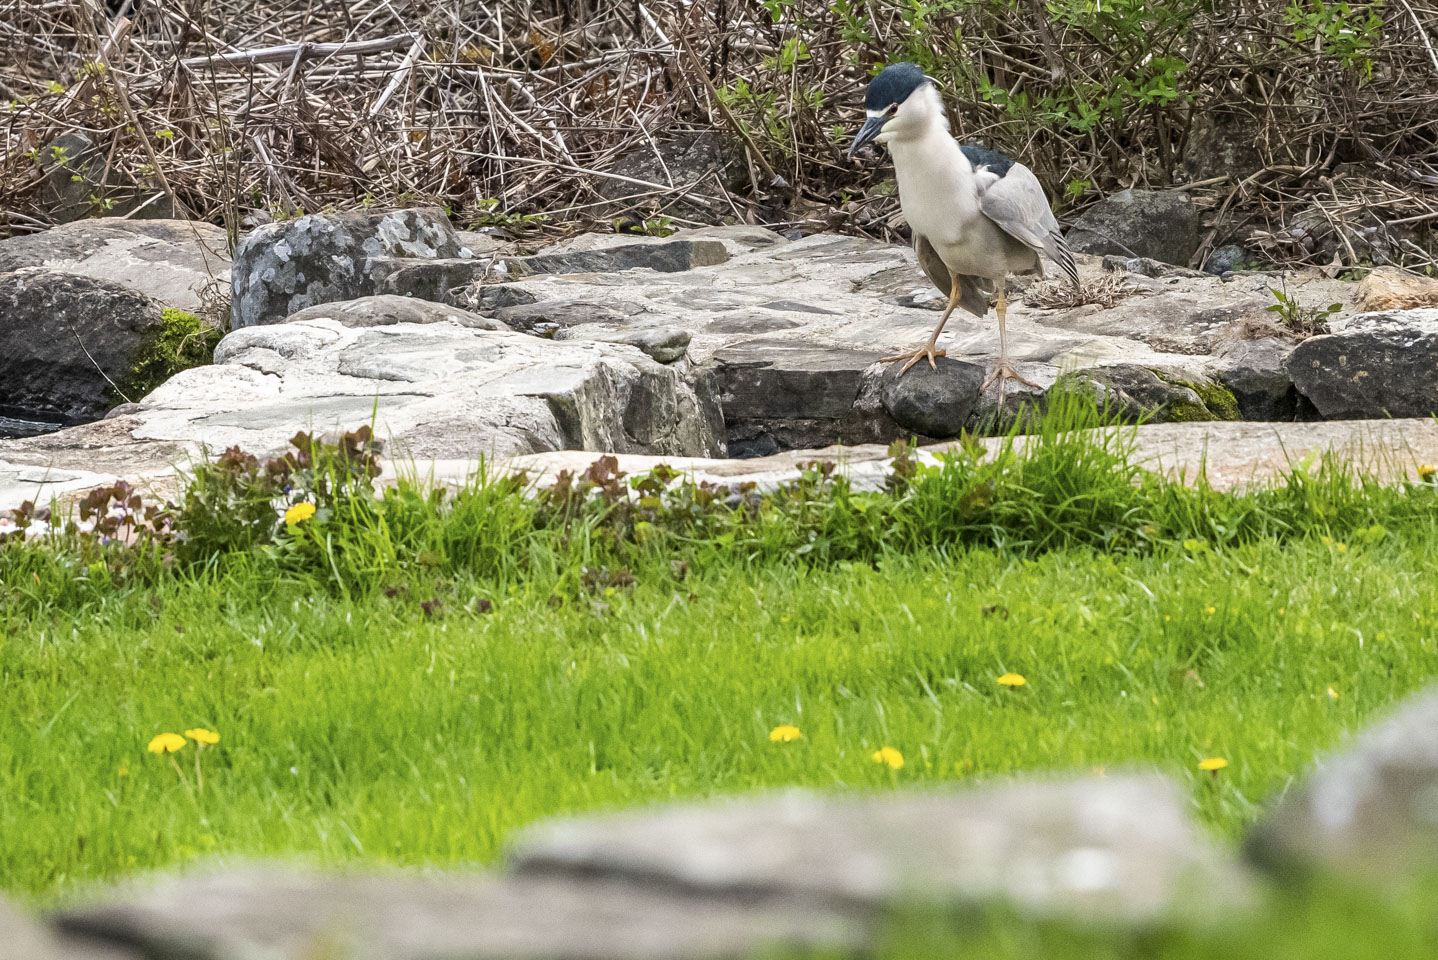 Black Crowned Night Heron with neck extended